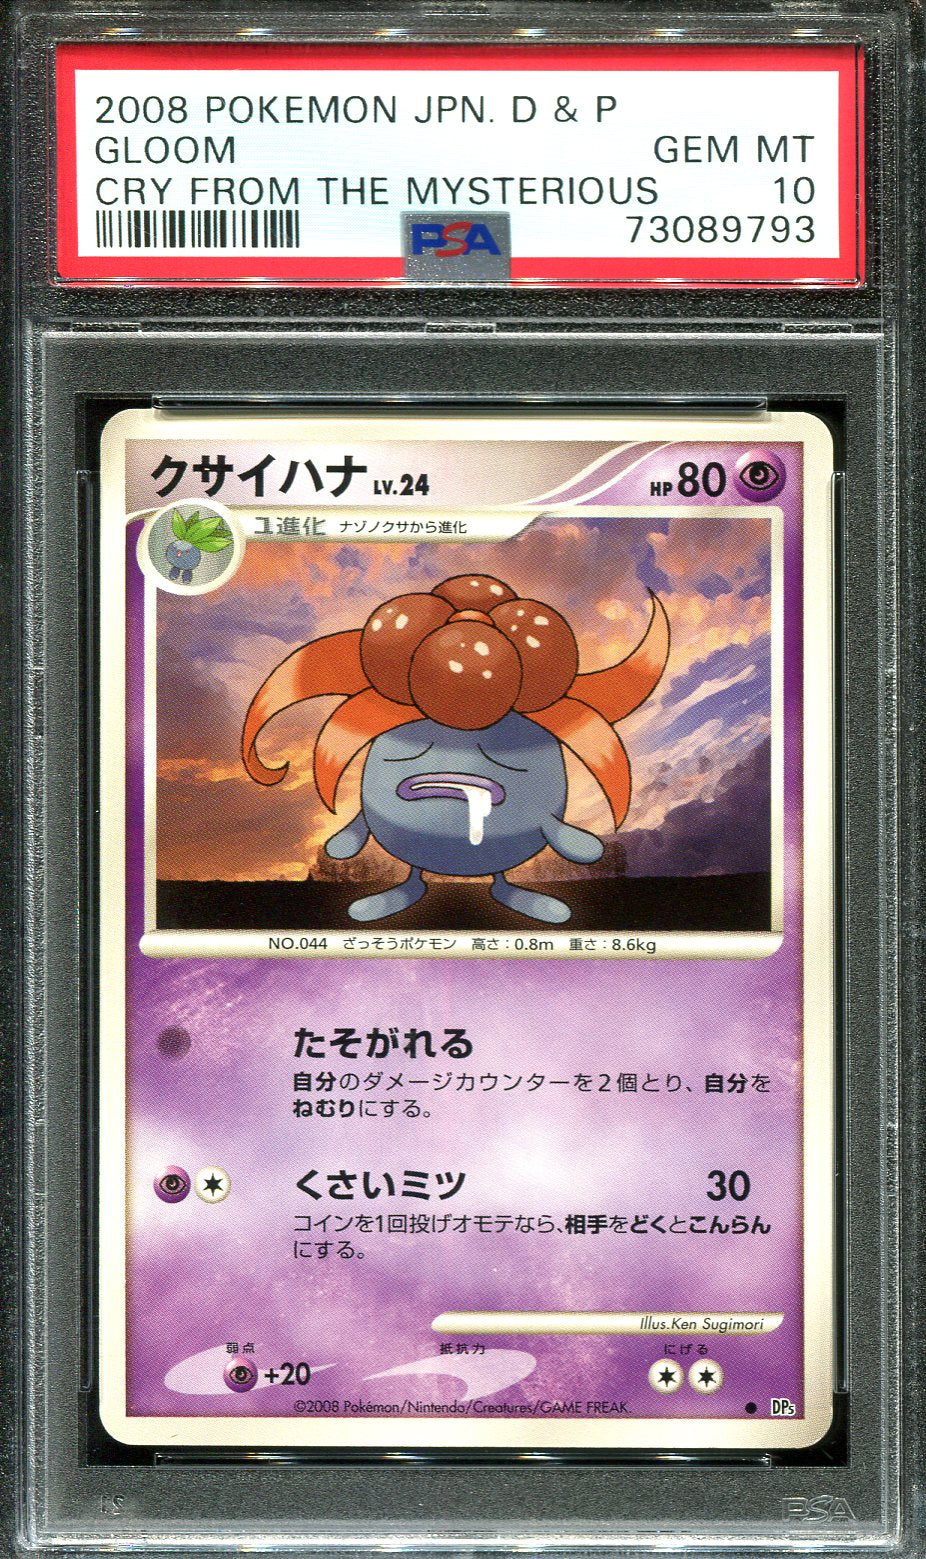 GLOOM PSA 10 POKEMON CRY FROM THE MYSTERIOUS DP5 JAPANESE